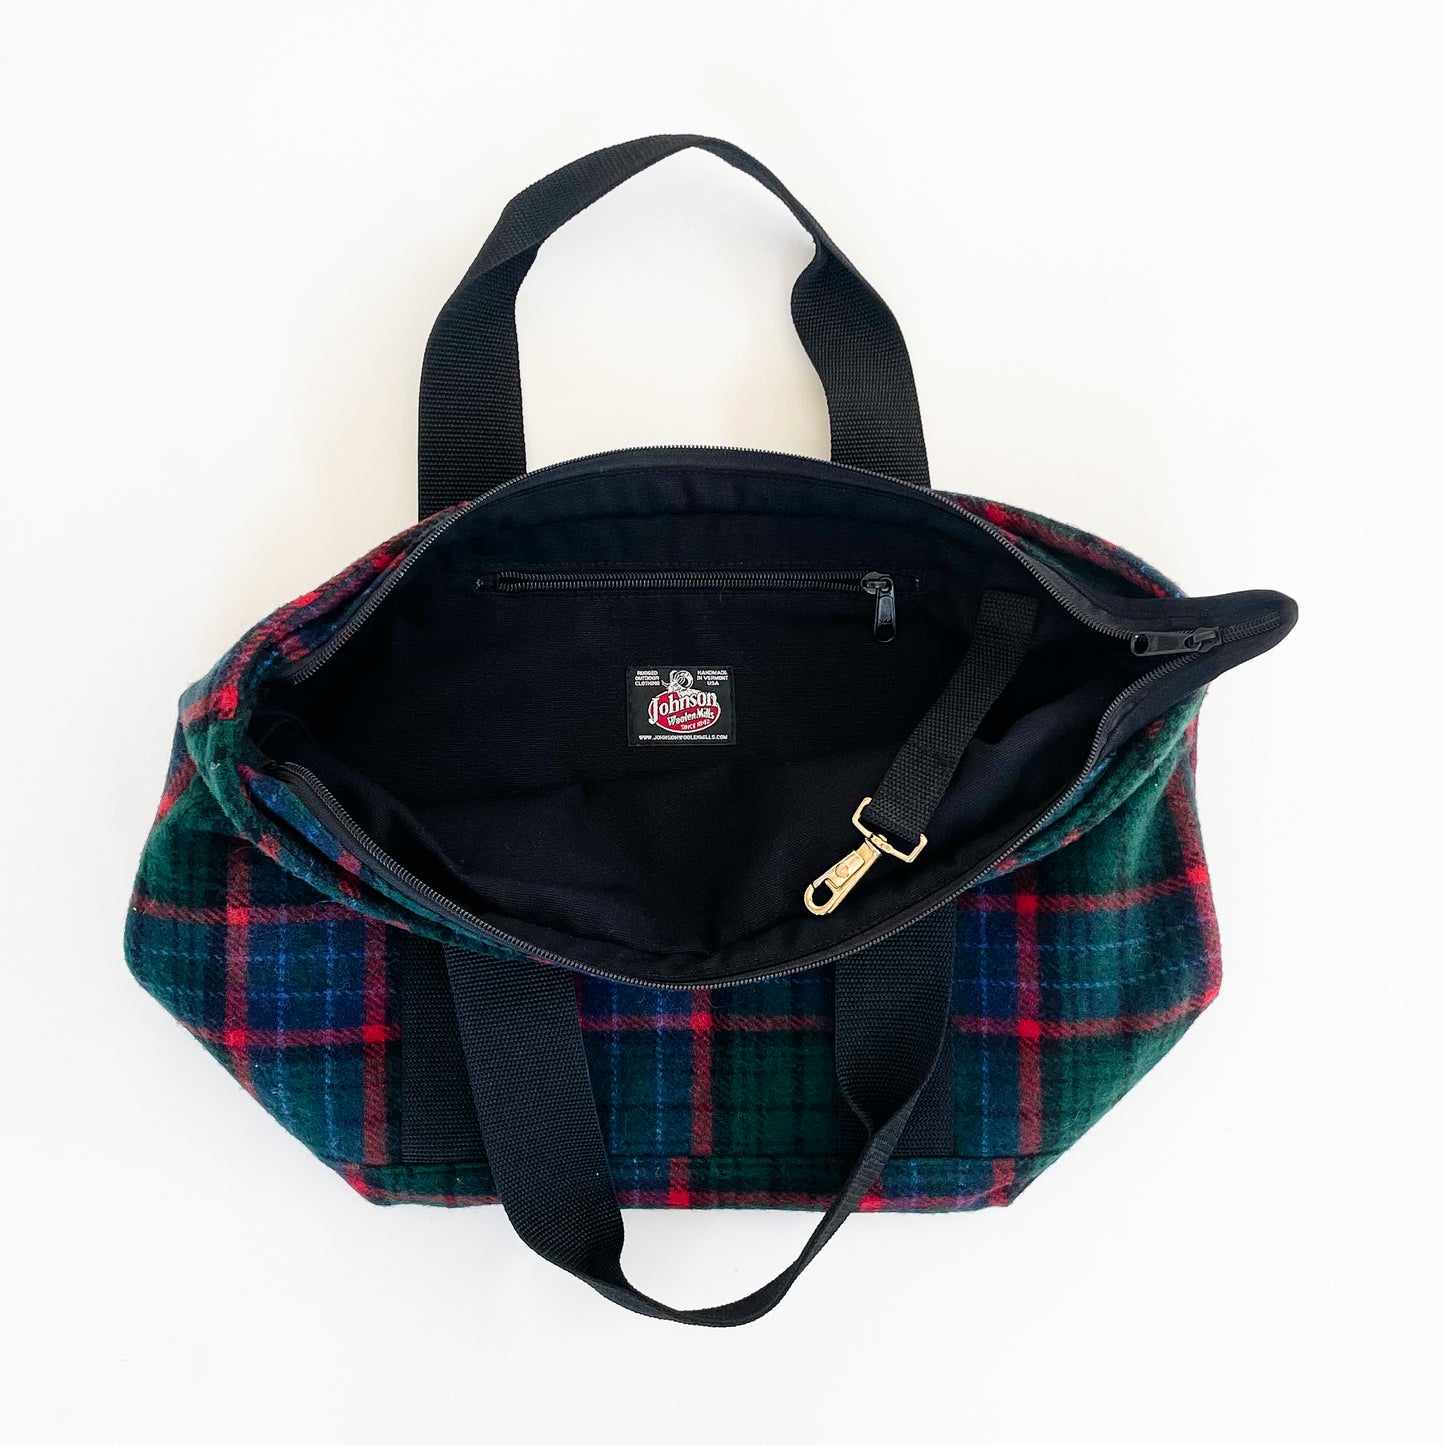 Johnson Woolen Mills Tote Bag Green/Blue with Red strips windowpane open bag view with strap